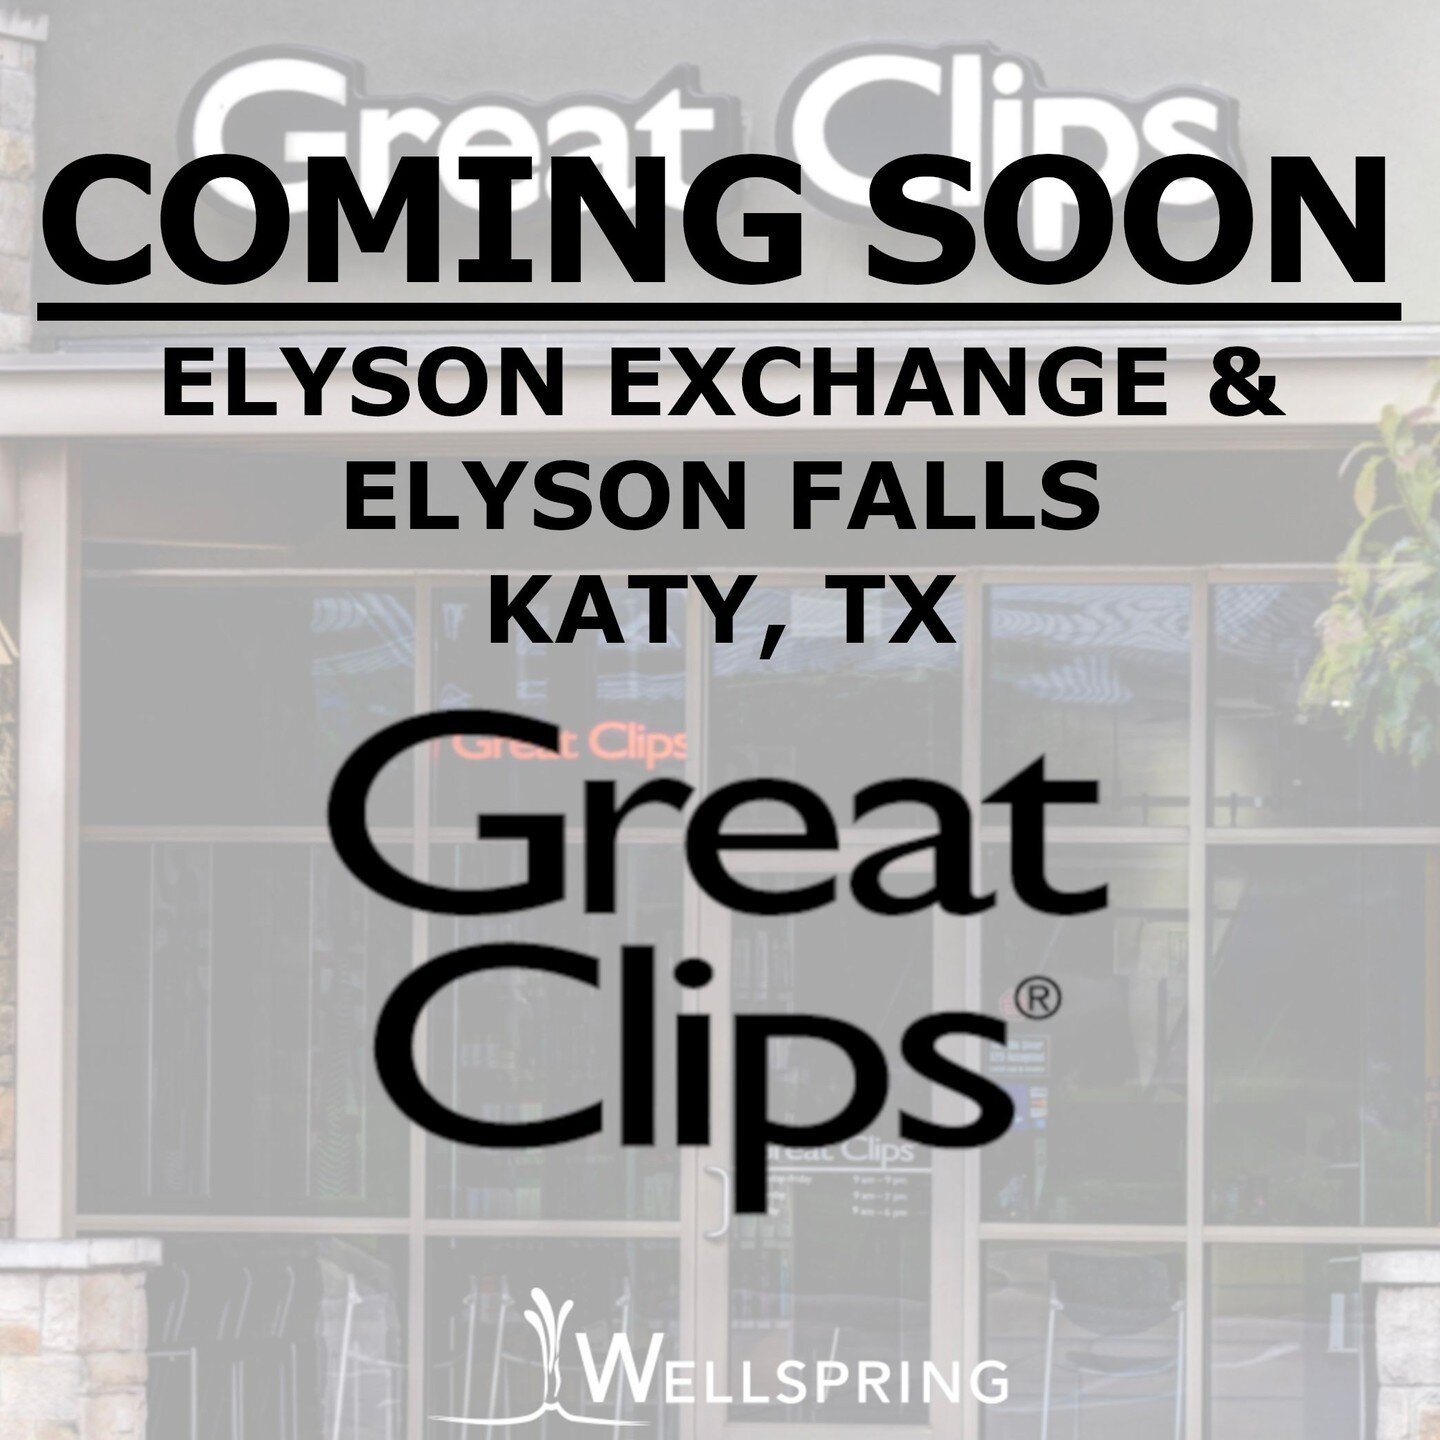 As Houston grows, so does Great Clips. Another new salon coming soon to Katy, Texas as part of the Elyson community!

Parker Frede with New Regional Planning represented the Landlord, and Marshall C. Bumpus with Wellspring Commercial Real Estate repr